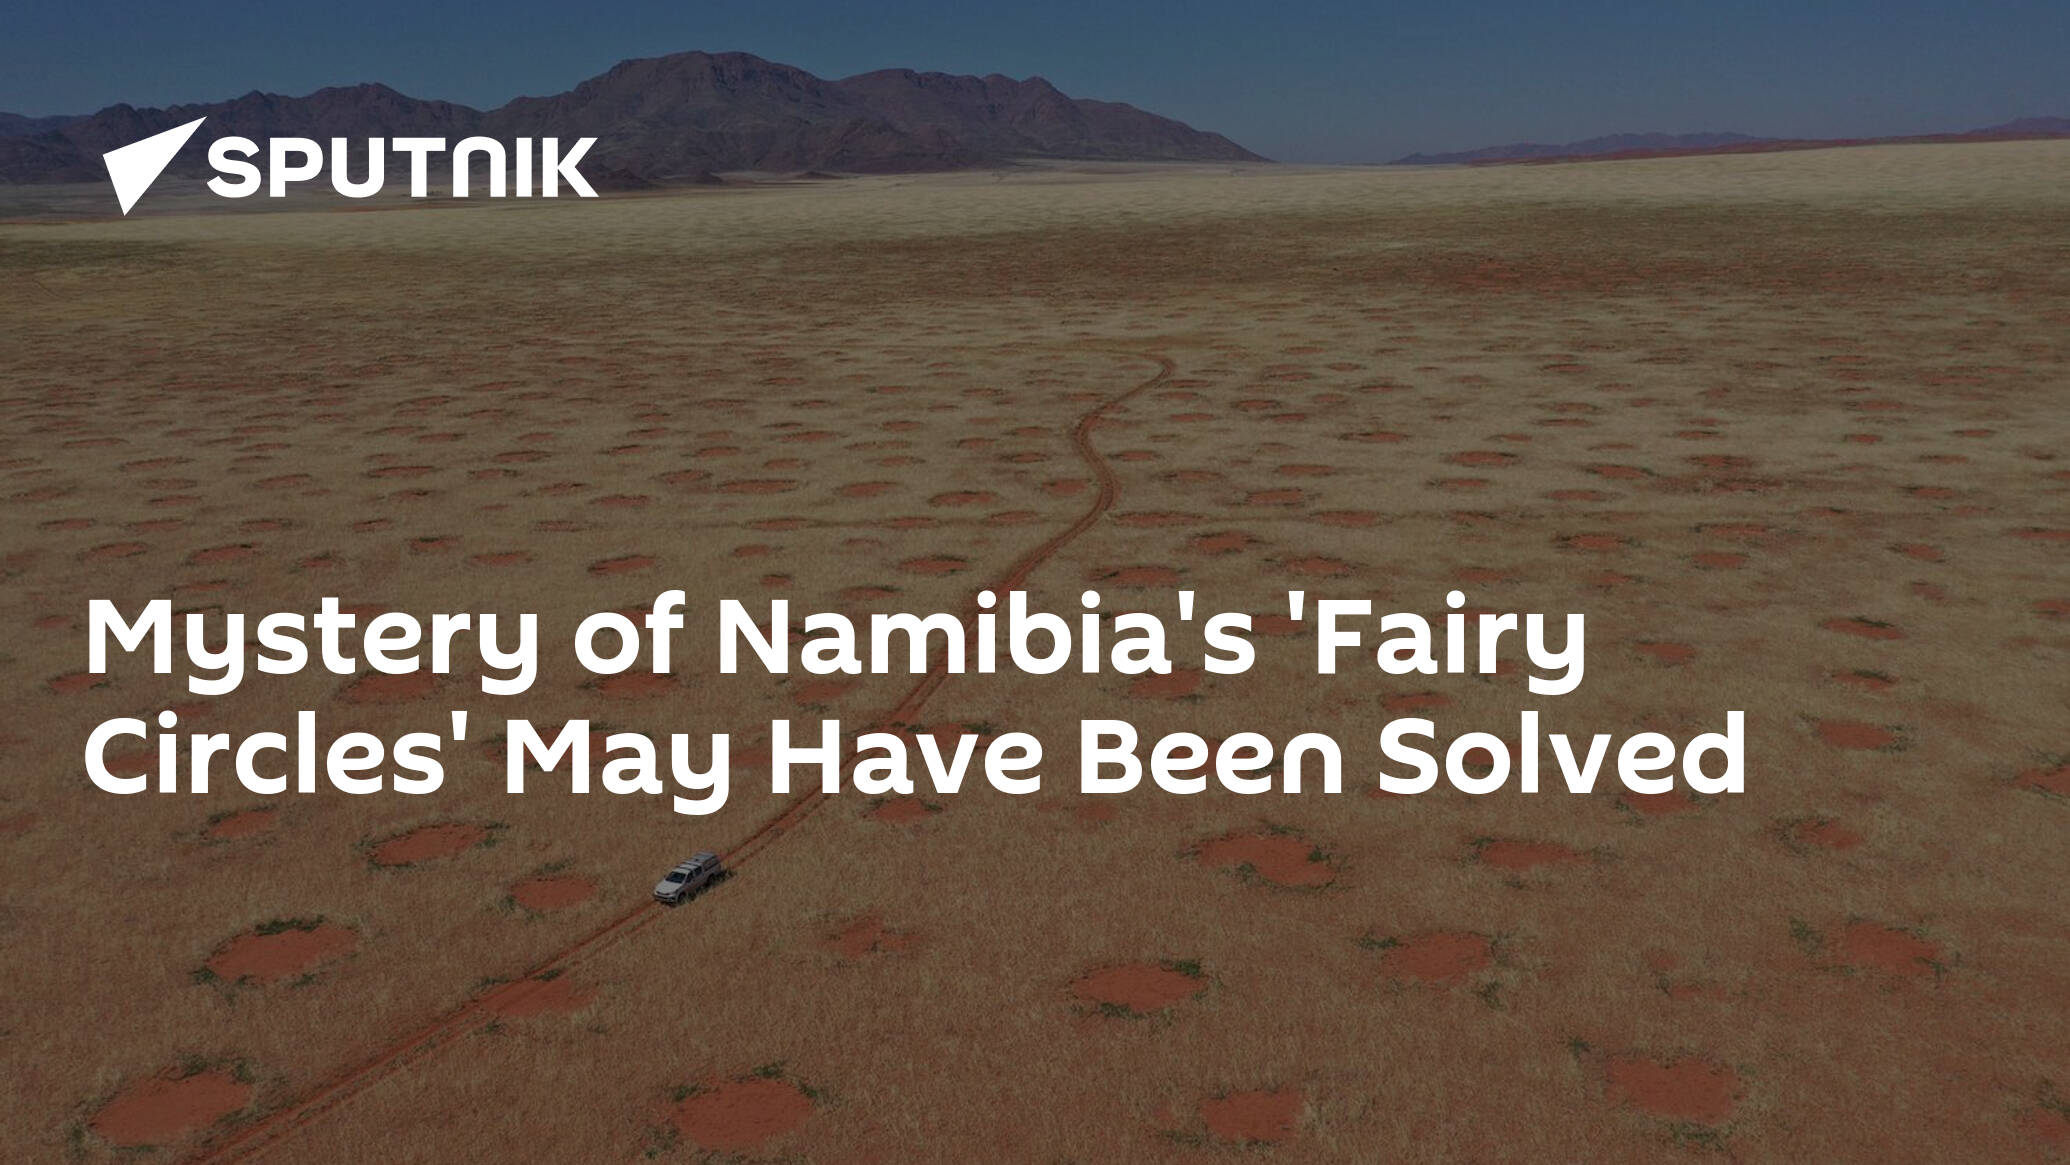 Mystery of Namibia's 'Fairy Circles' May Have Been Solved - 30.10.2022,  Sputnik International